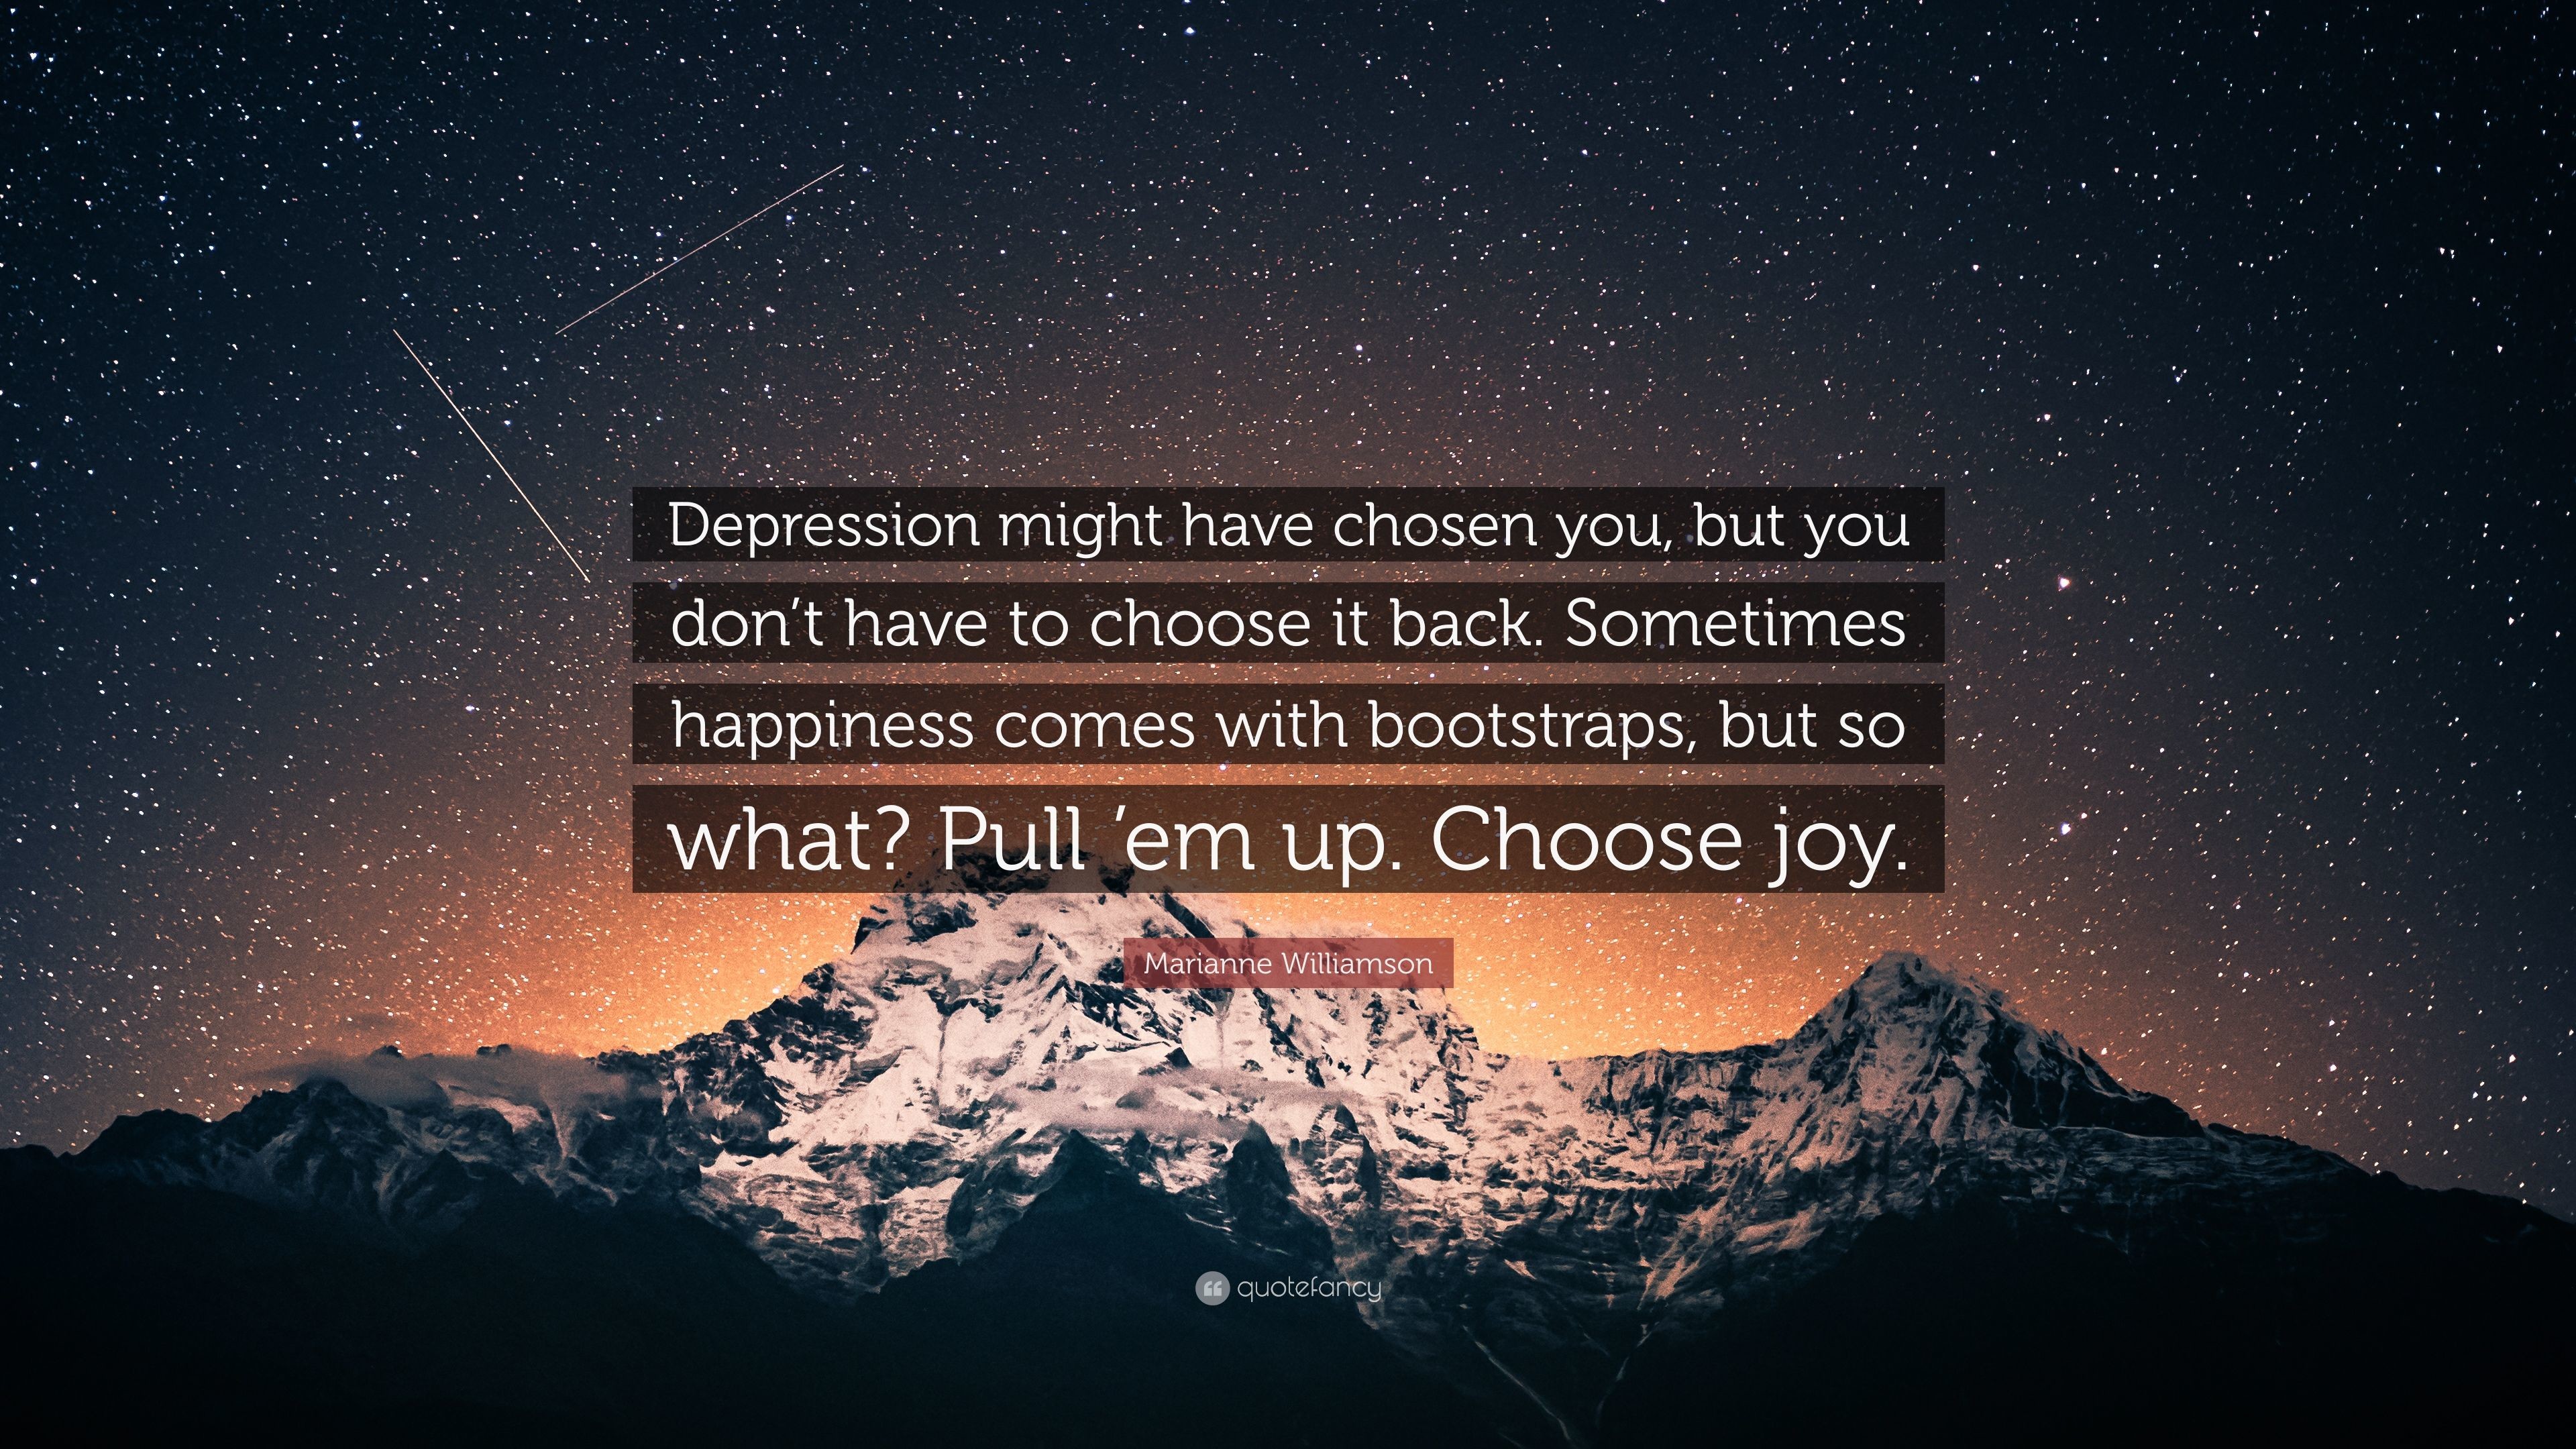 3840x2160 Marianne Williamson Quote: “Depression might have chosen you, but you don't